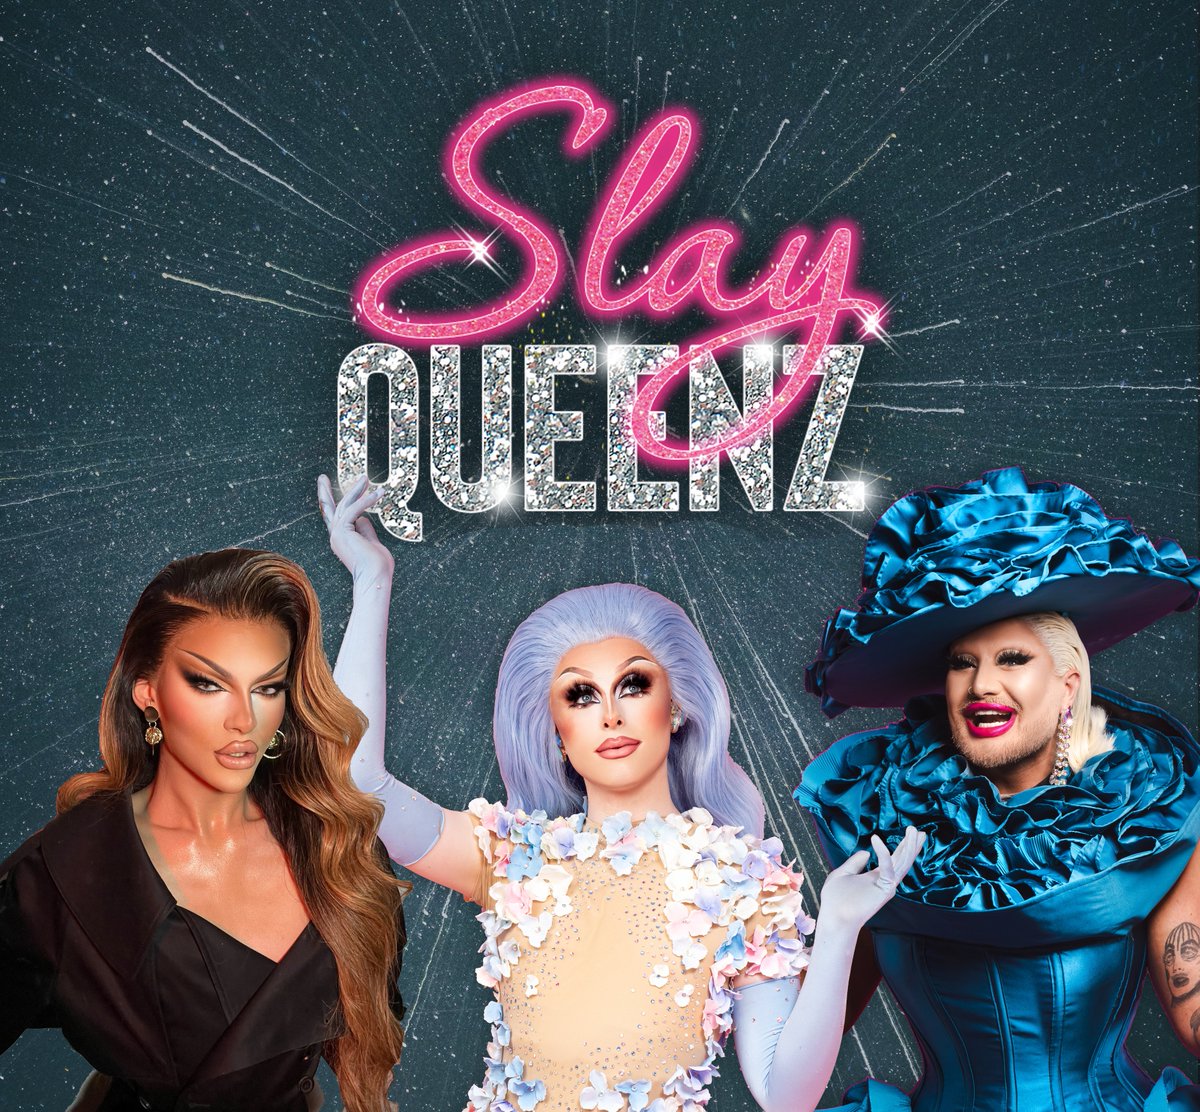 💋 SLAY QUEENZ 💋 ⏱ Friday 6th October 7.30pm 🎟 BOOK NOW bit.ly/3JwjlVc Join the latest three winners of RuPaul Drag Race UK for an exclusive spectacular of side-splitting laughs, jaw-dropping vocals and eye-popping outfits.